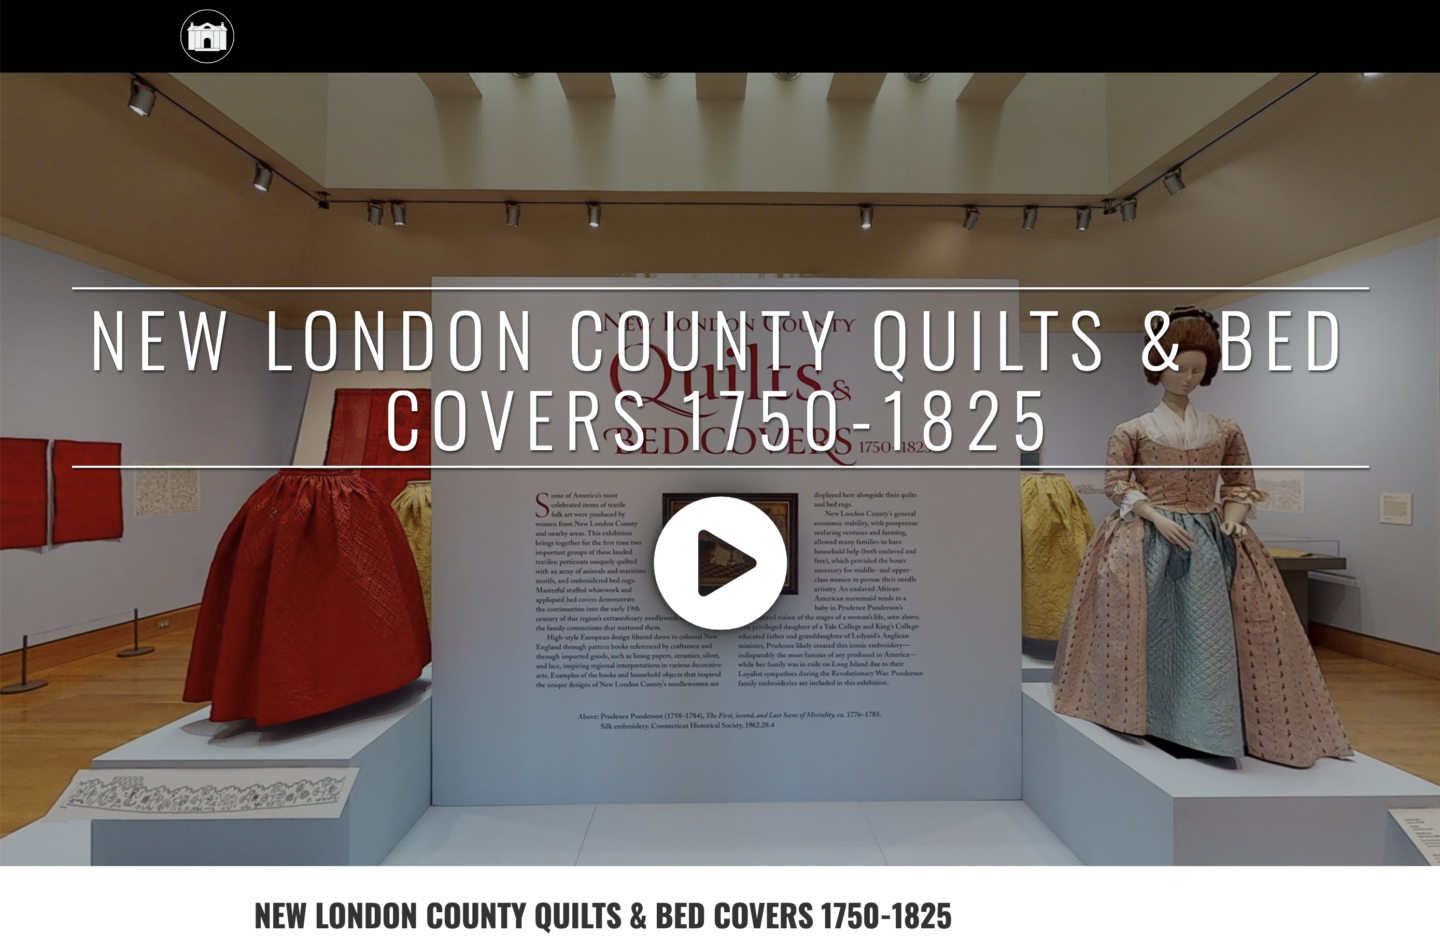 New London County Quilts & Bed Covers, 1750-1825